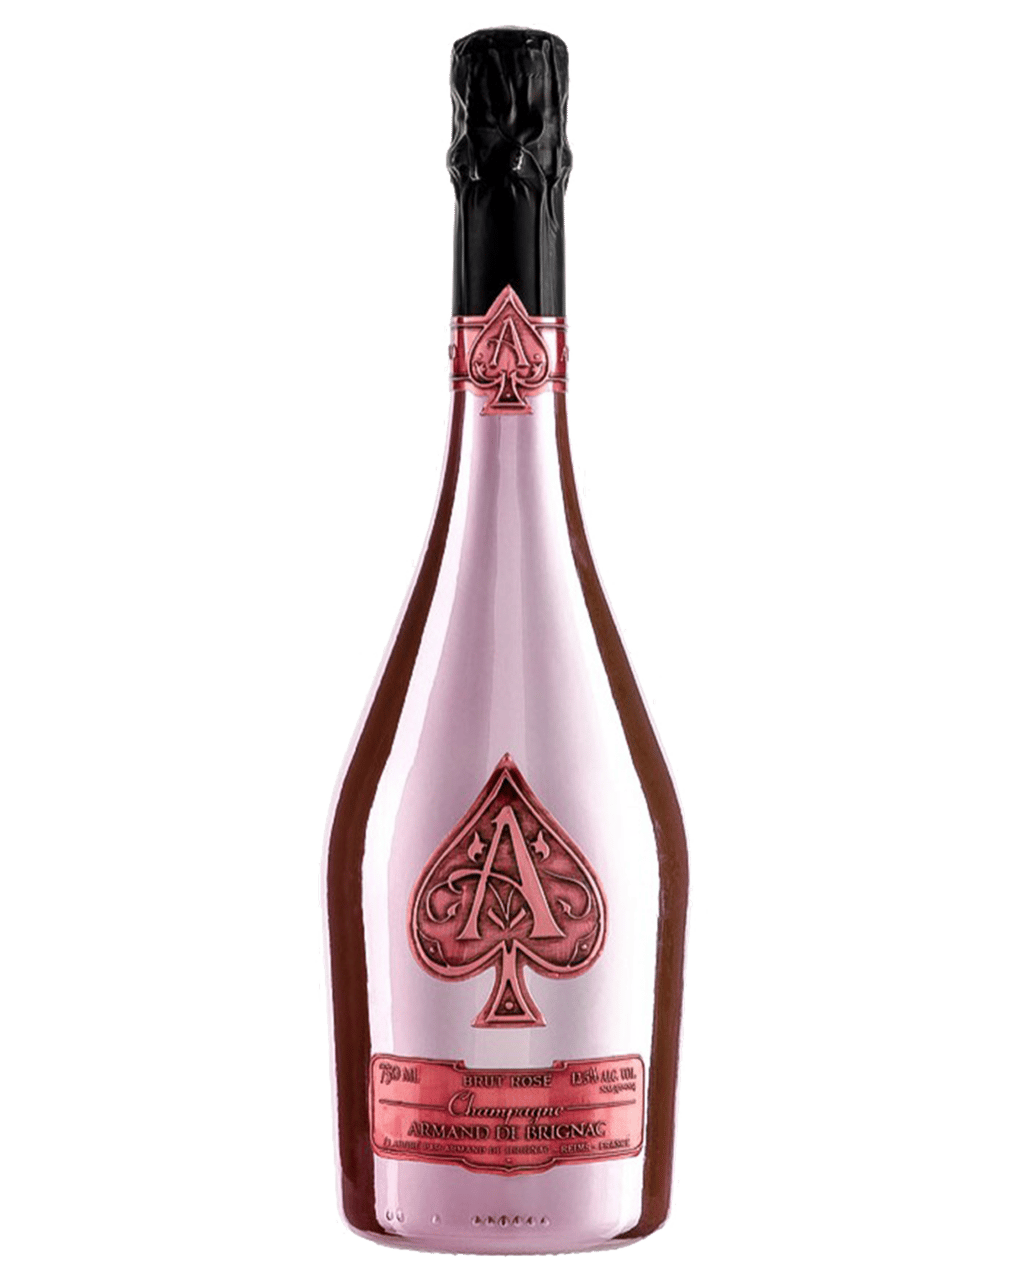 Champagne Face-Off: Cristal vs Ace of Spades